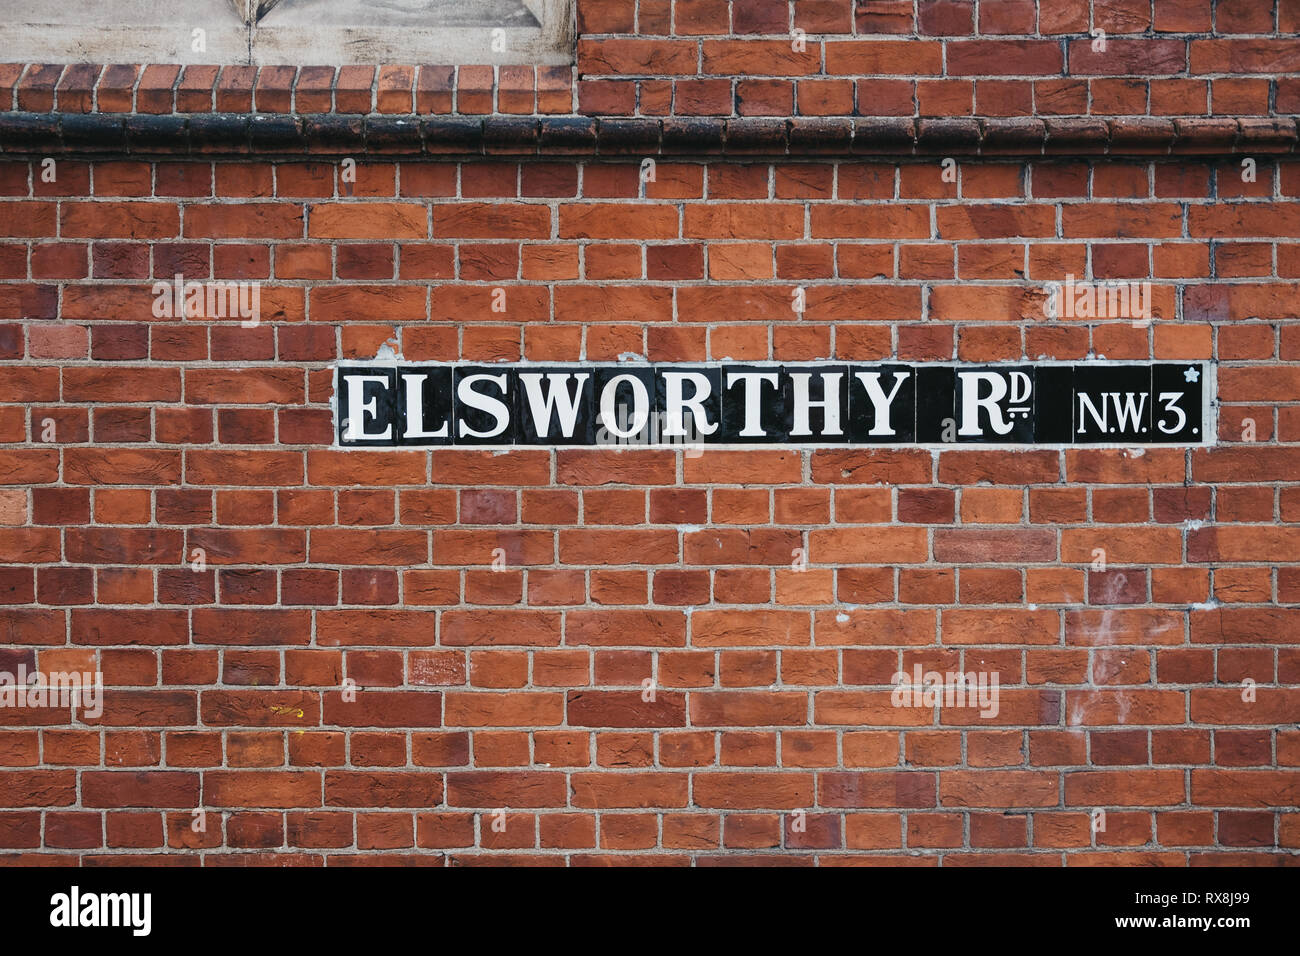 London, UK - February 16, 2019: Street name sign on Elsworthy Road, Primrose Hill, an upscale area of North London that got its name from the famous P Stock Photo